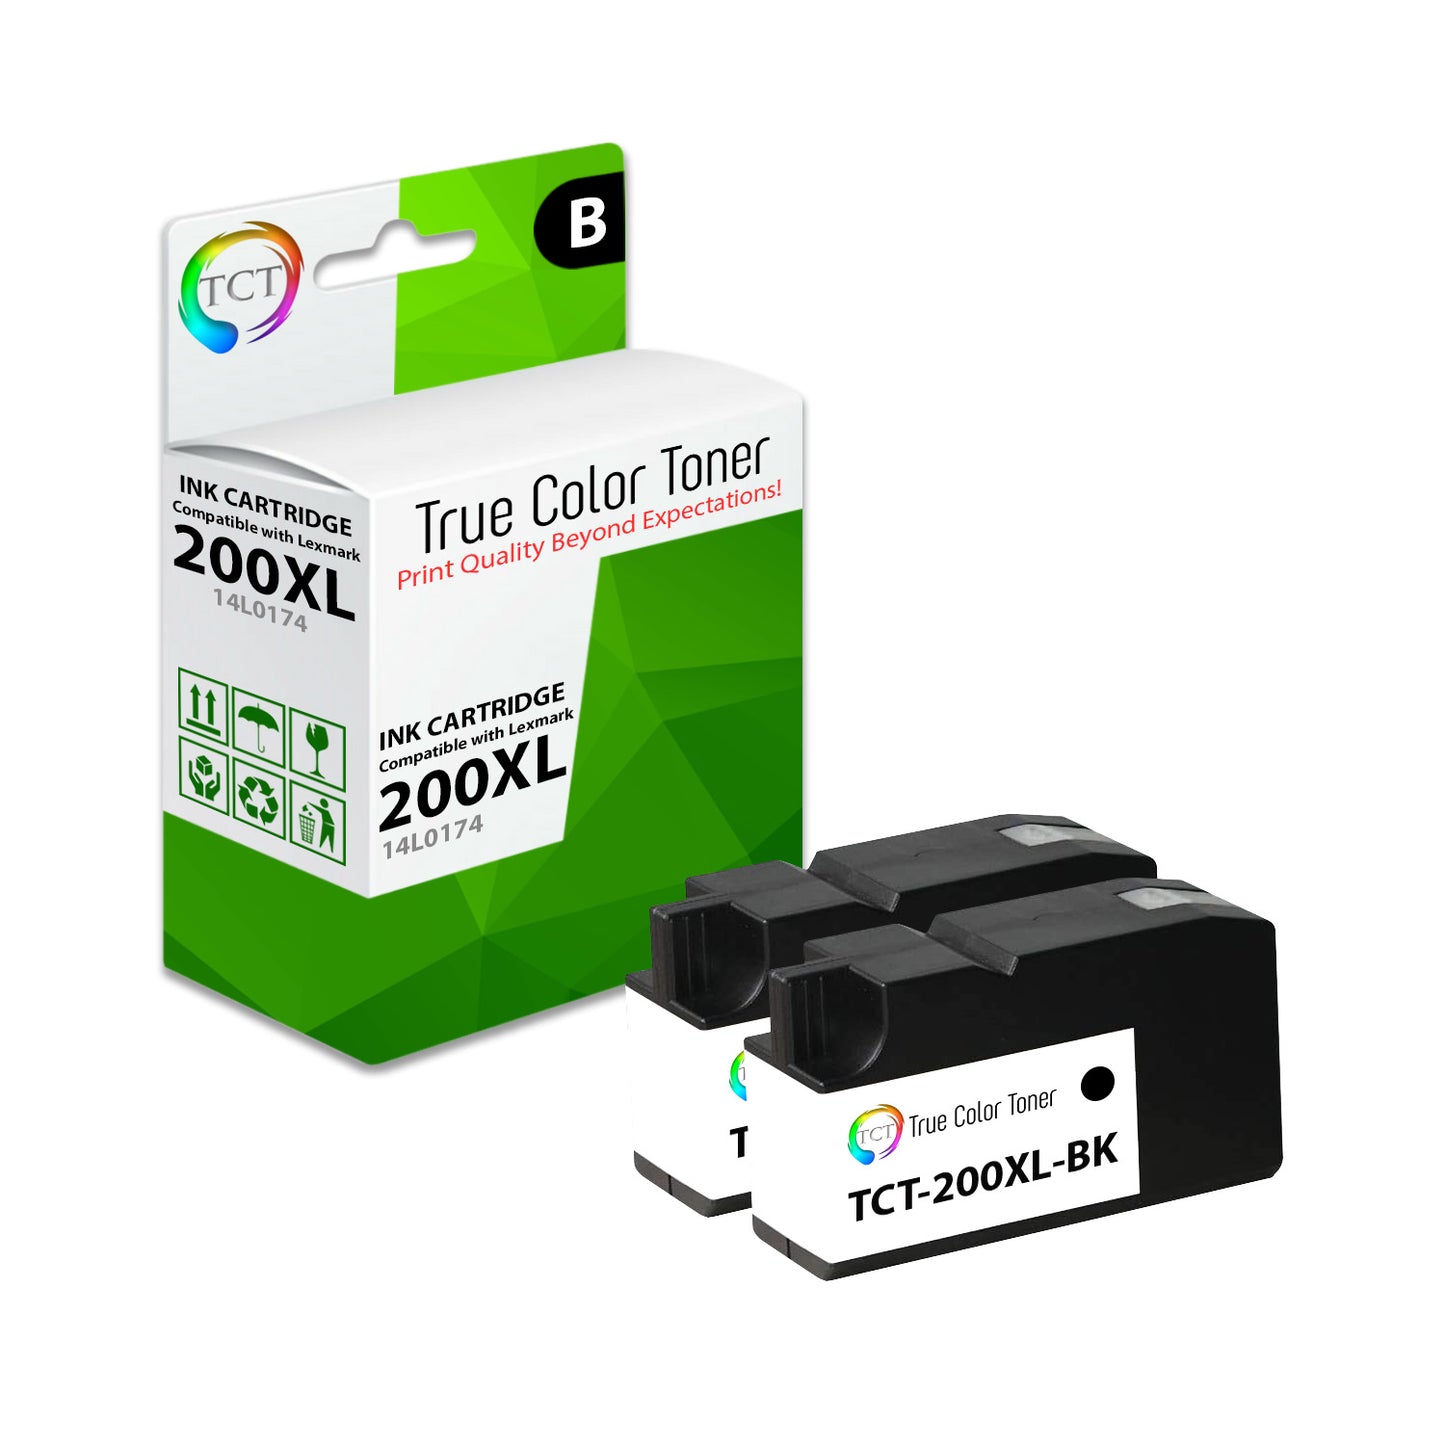 TCT Remanufactured High Yield Ink Cartridge Replacement for the Lexmark 200XL Series - 2 Pack Black